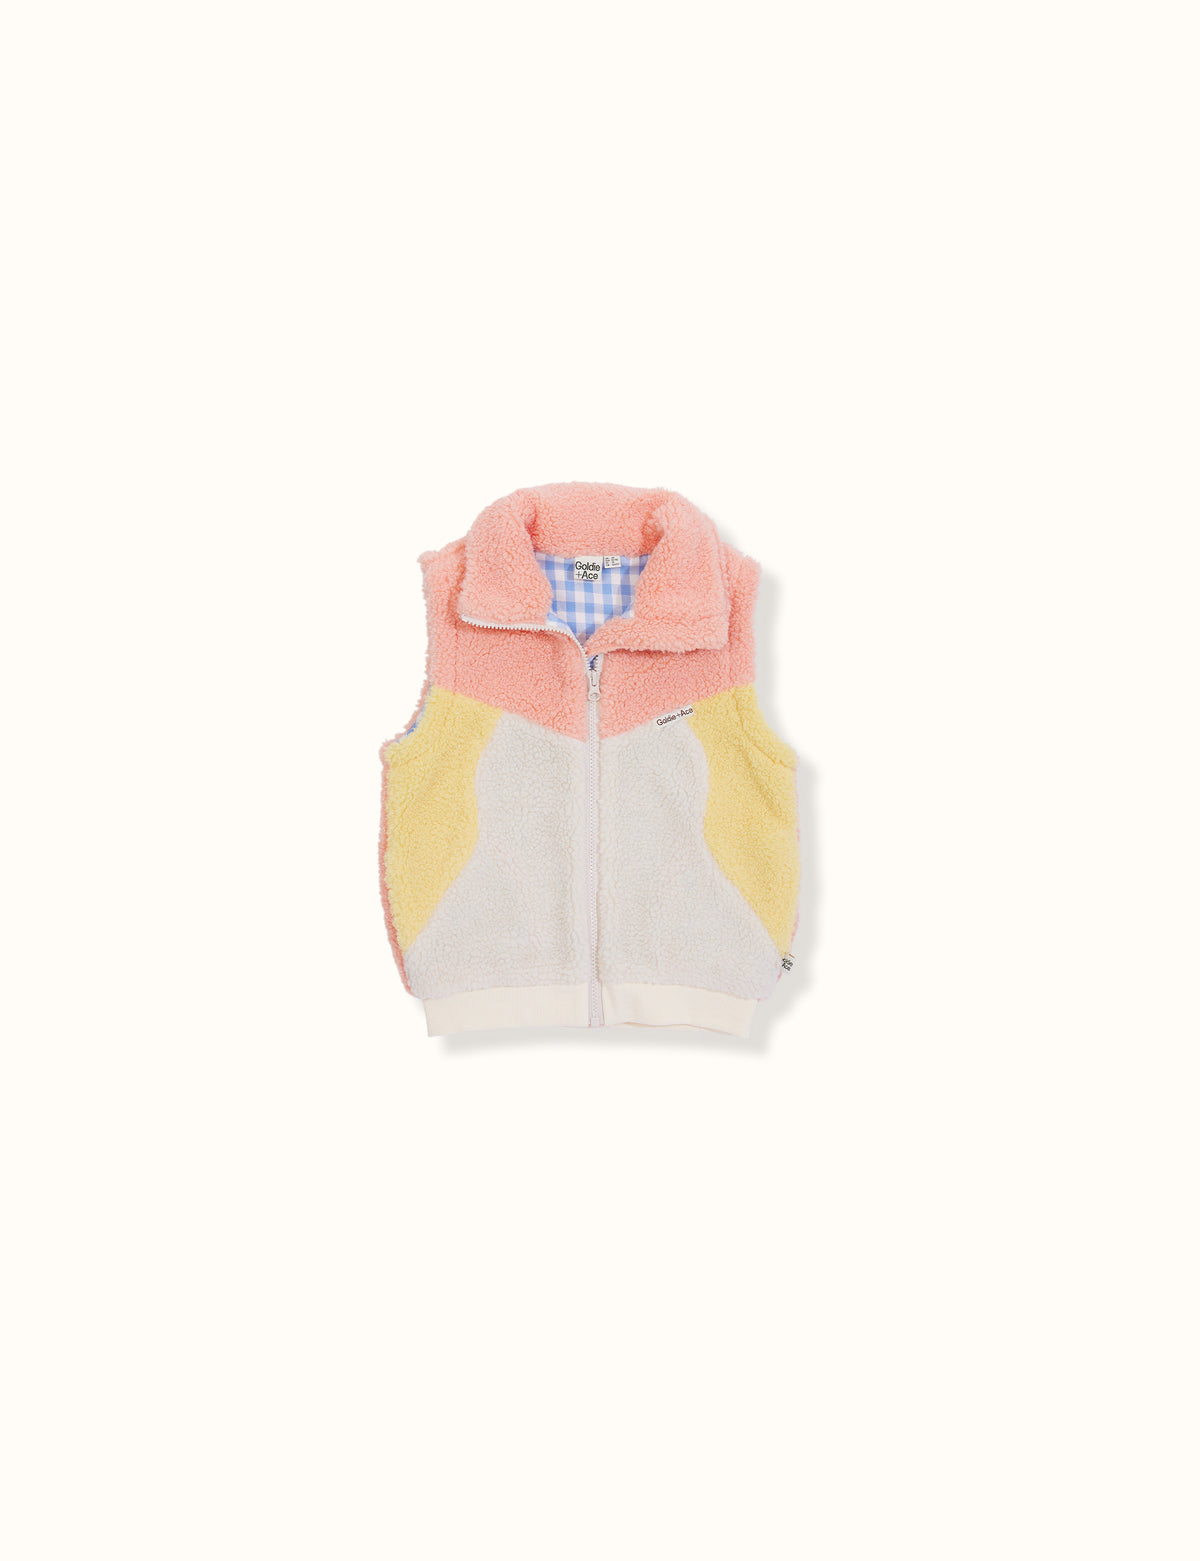 Maxx Shearling Jacket With Zip Off Sleeves - Peach Cream